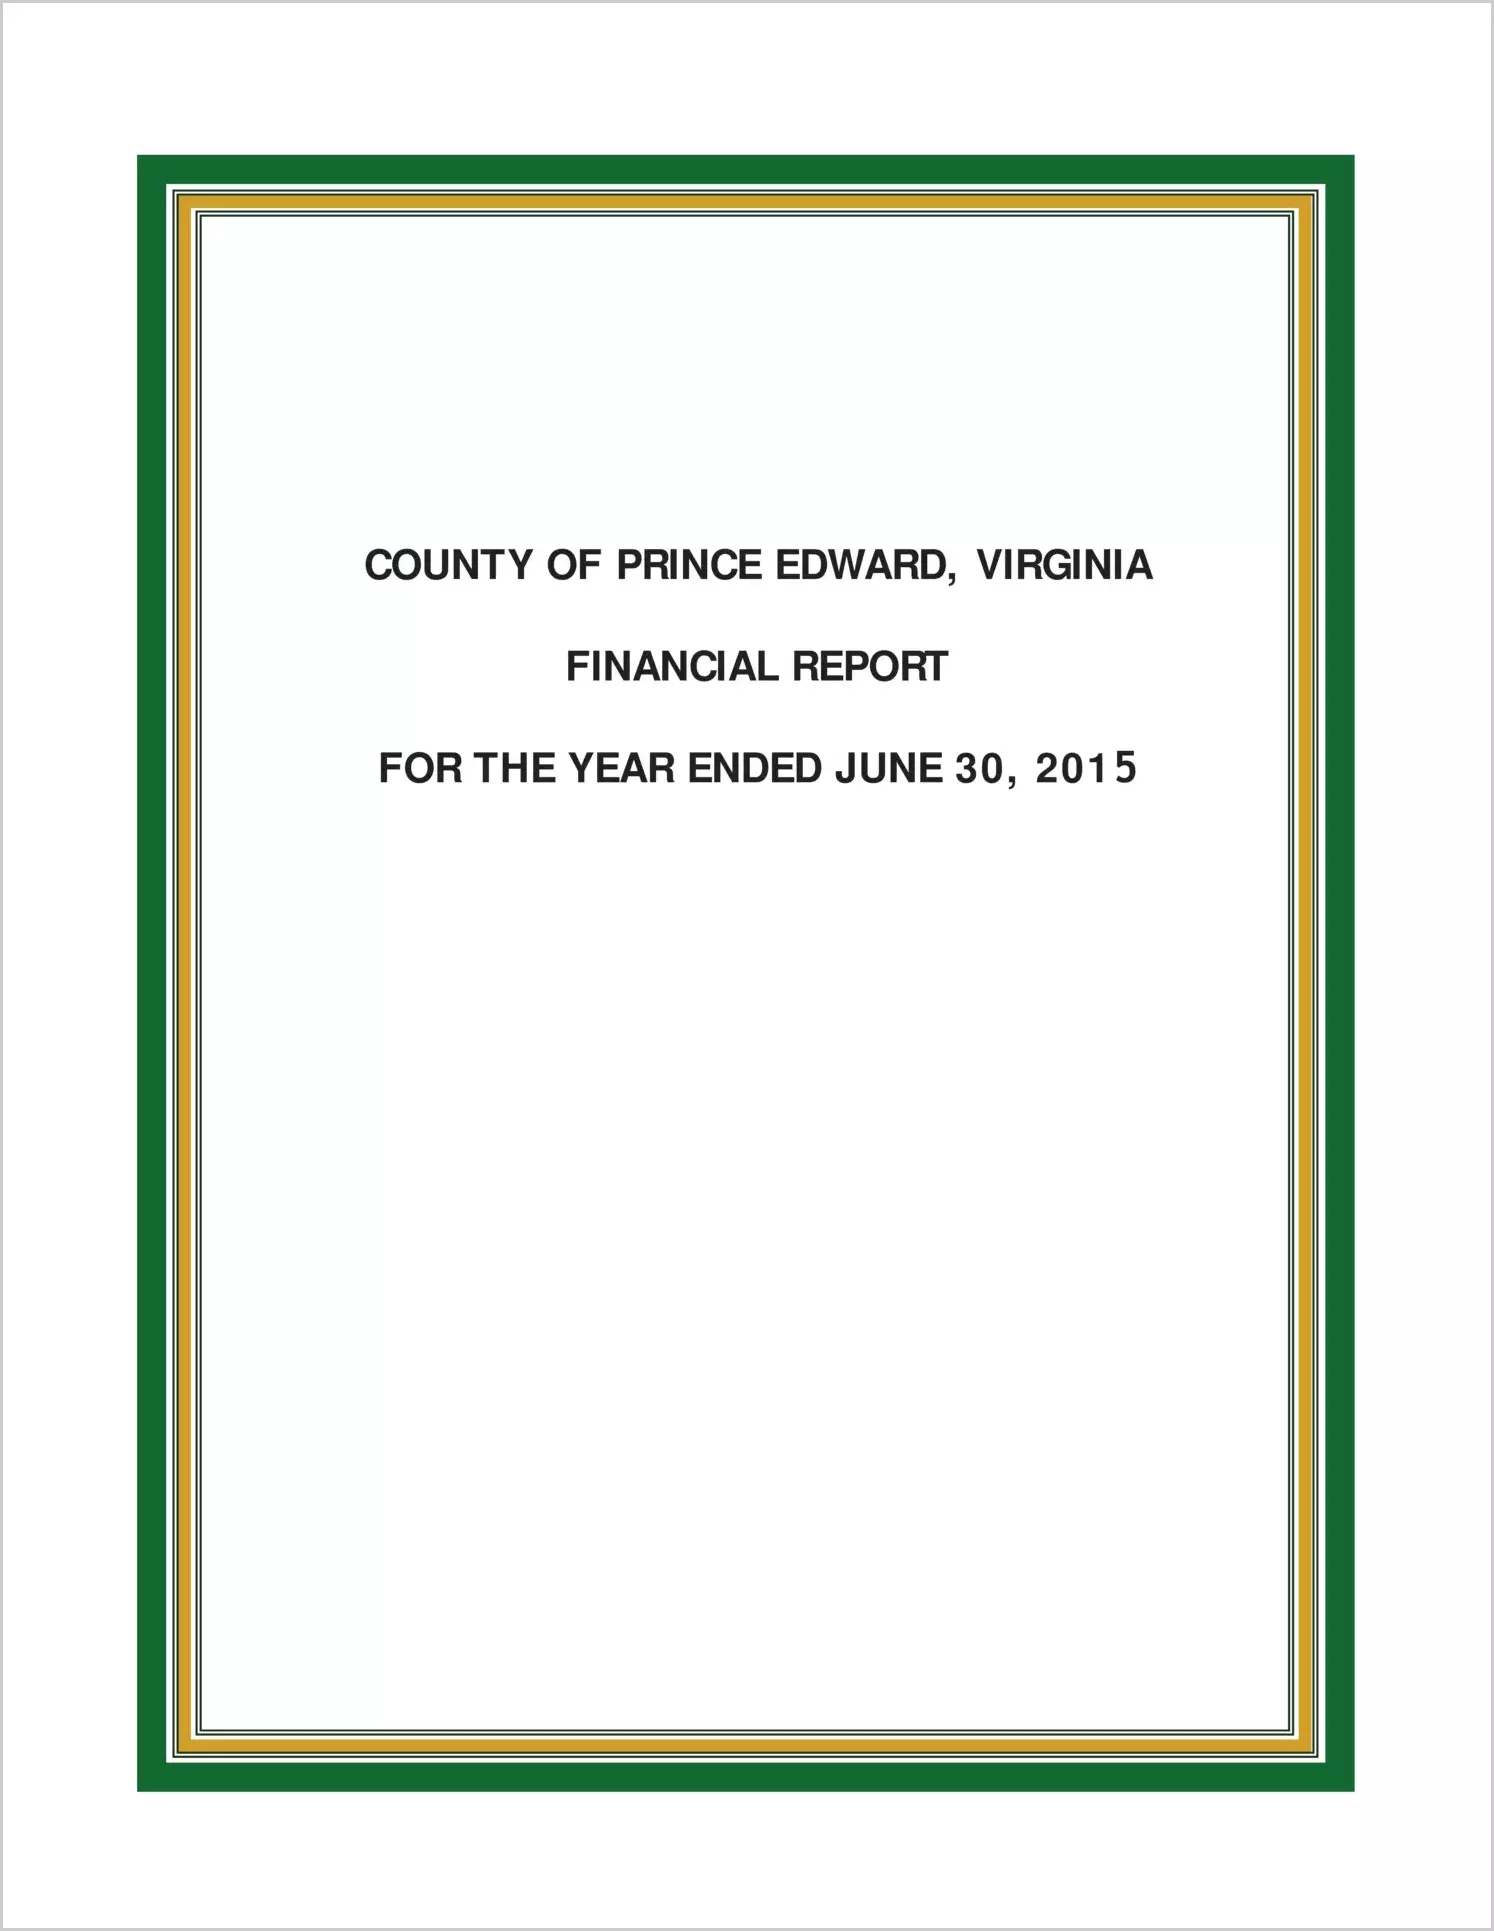 2015 Annual Financial Report for County of Prince Edward